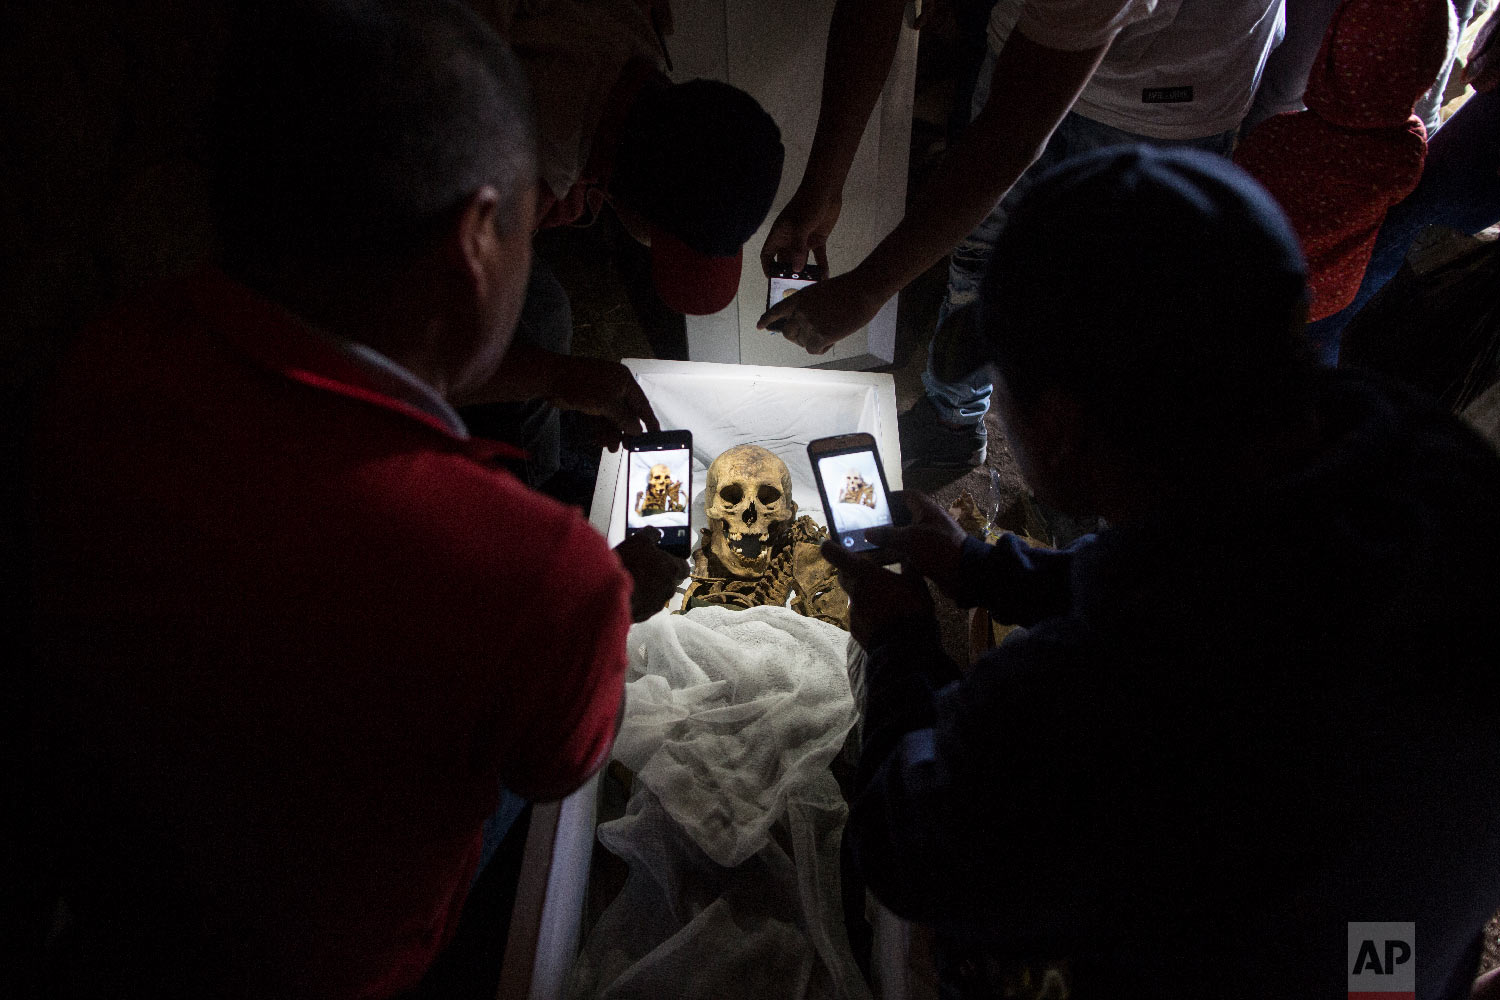  In this Aug. 14, 2018 photo, relatives take cell phone pictures of the remains of Fortunate Ventura Huamacusi, a man who was killed by the Peruvian army in 1983, before placing the coffin in its niche at the Rosaspata cemetery in Peru's Ayacucho pro